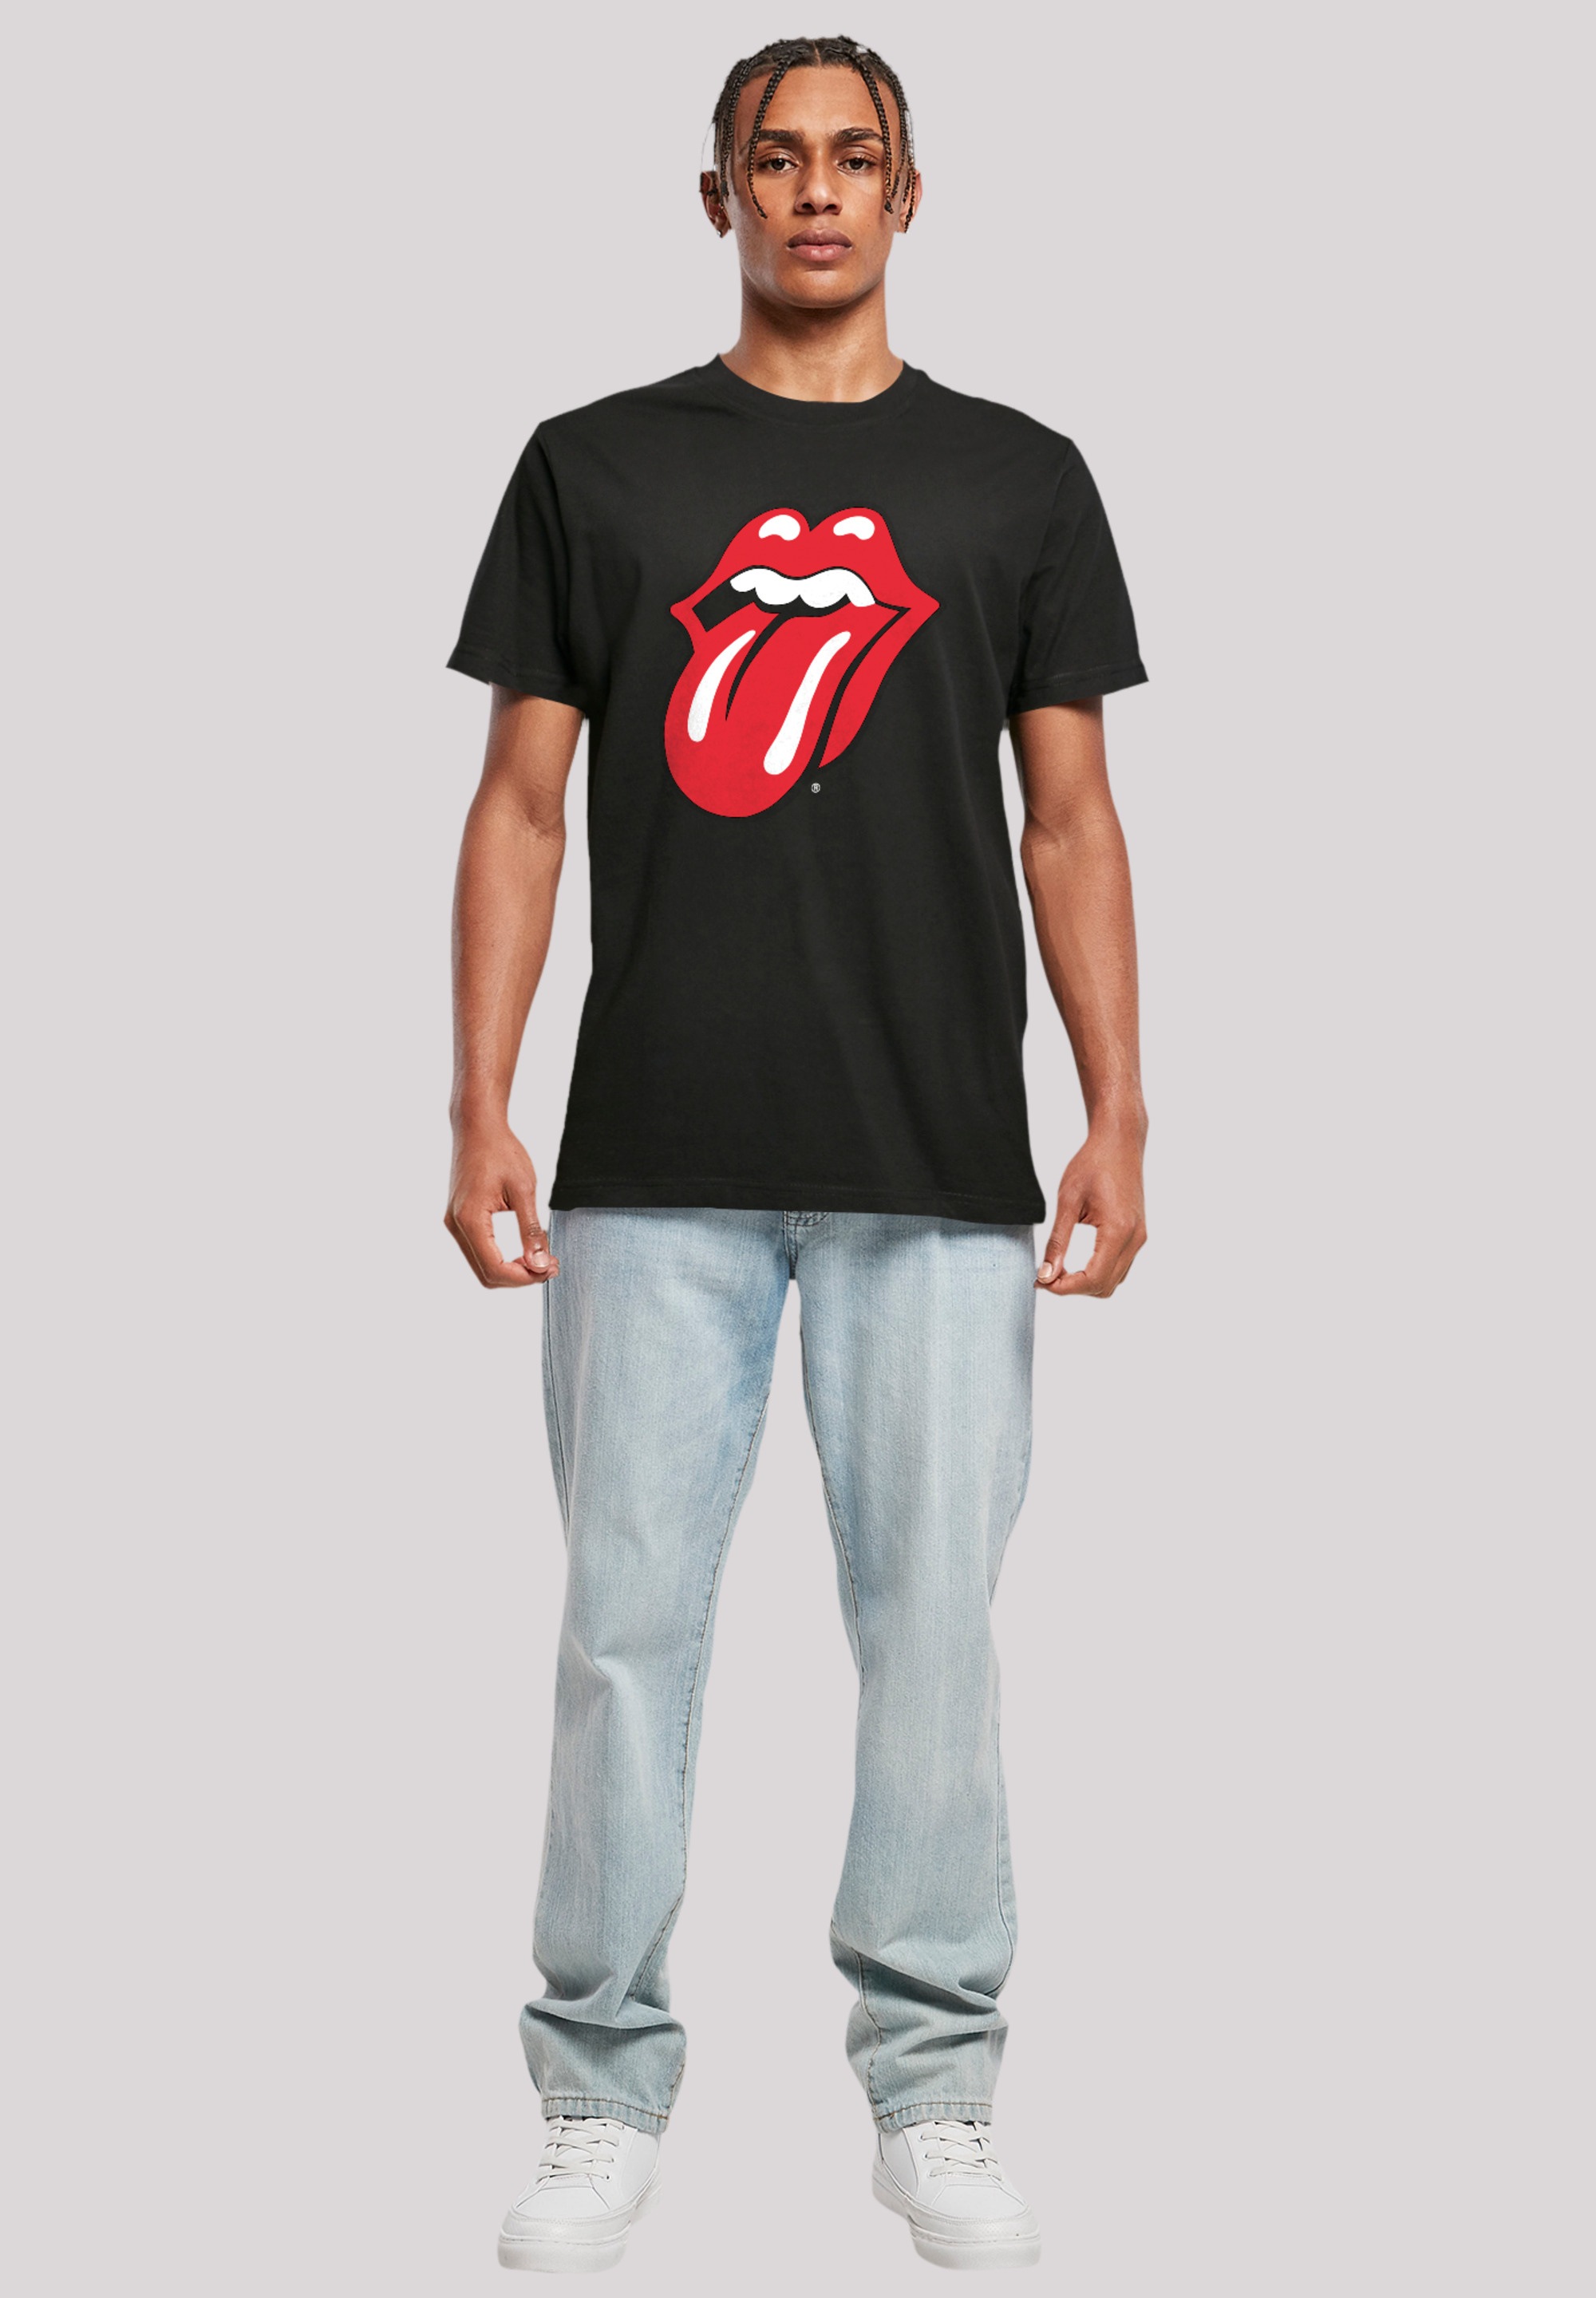 F4NT4STIC T-Shirt »The Rolling Stones Rote Zunge«, Print ▷ kaufen | BAUR